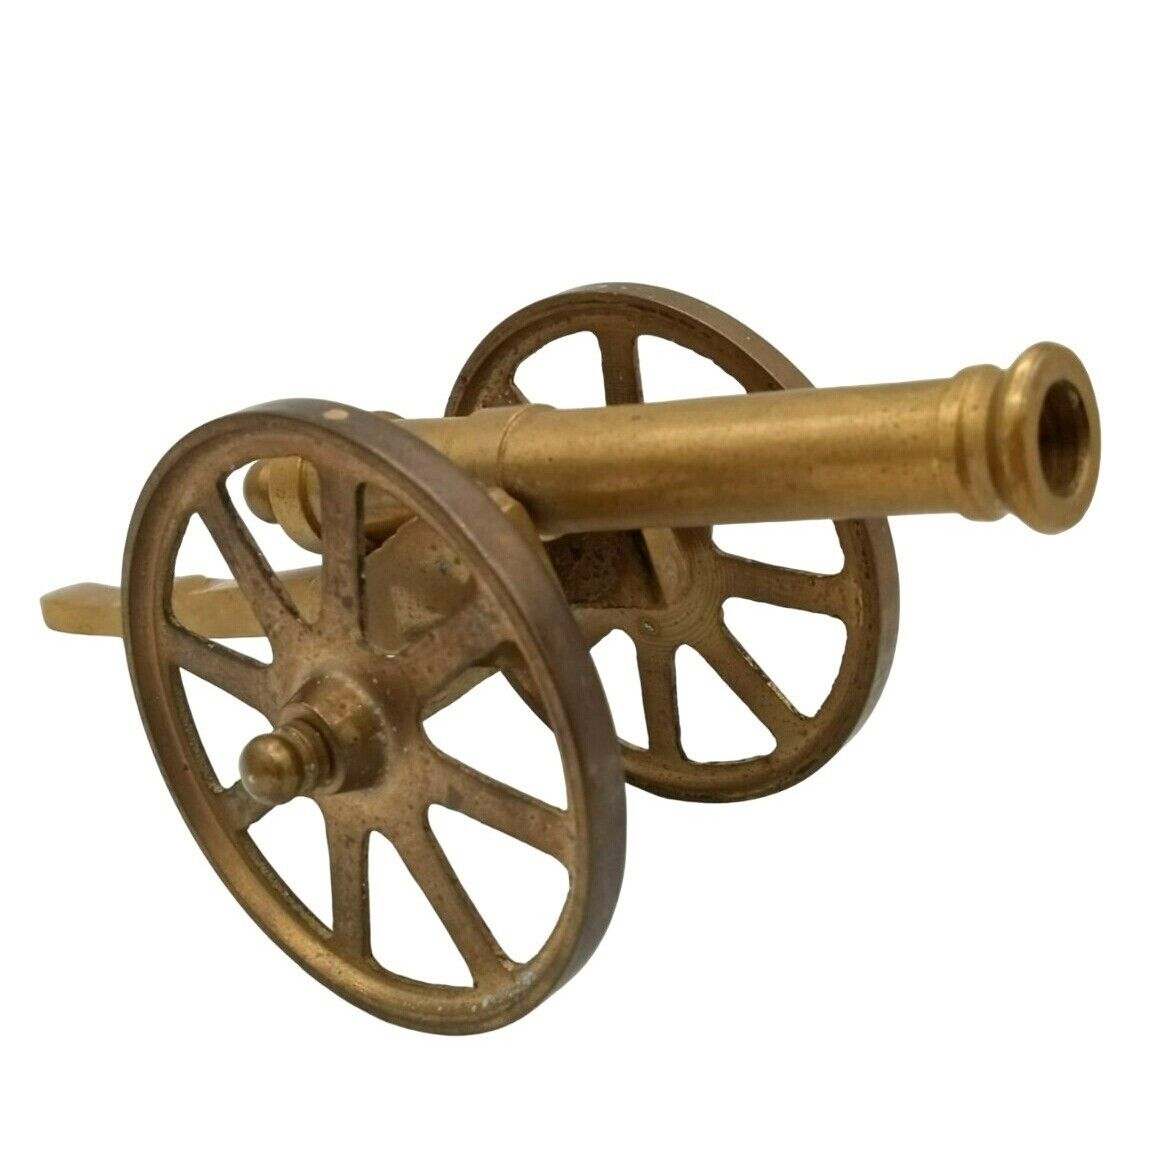 Solid Brass Desktop Vintage Cannon with Wheels Miniature Military Toy 7 Inch